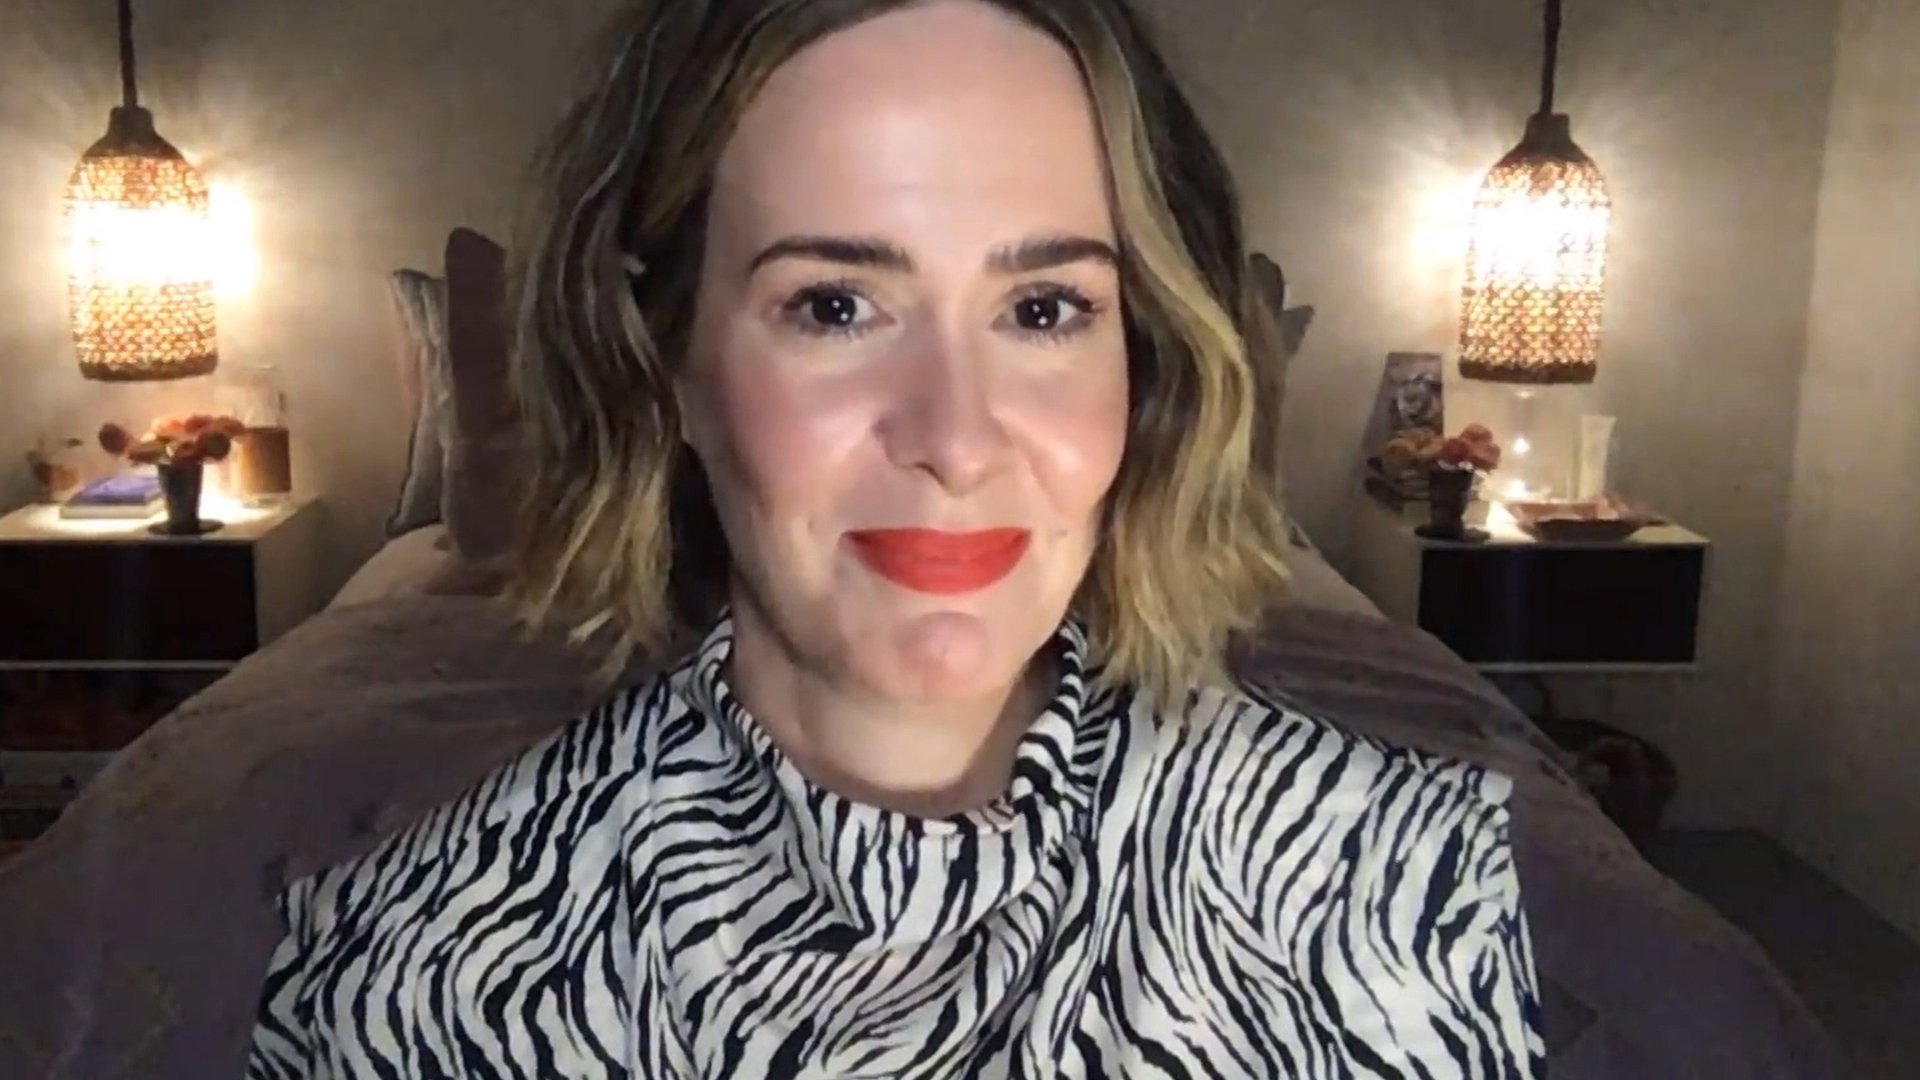 ‘American Horror Story’ Season 10: Sarah Paulson Updates Fans on Her Return to the ‘AHS’ Franchise